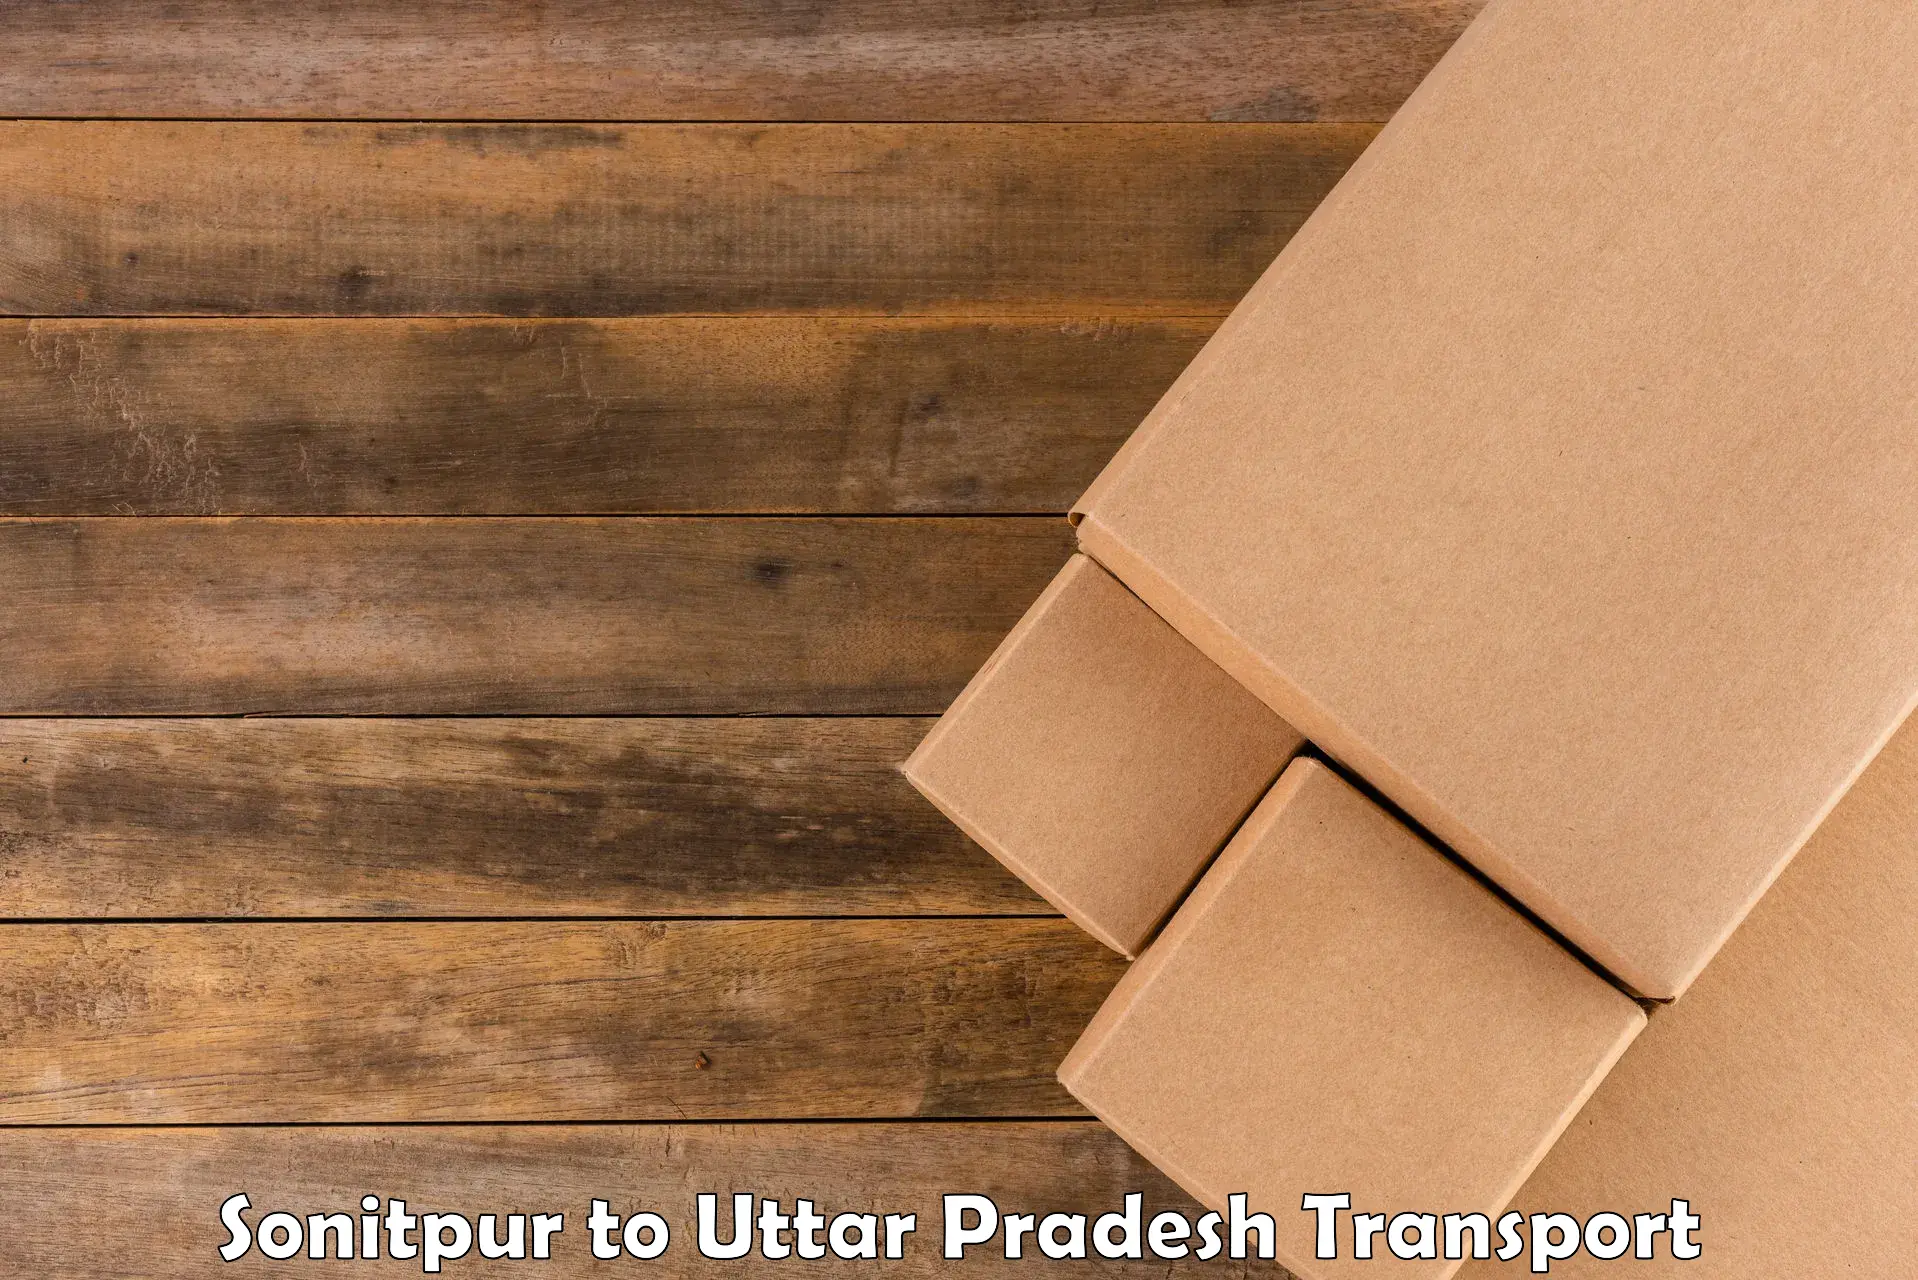 Pick up transport service in Sonitpur to Tanda